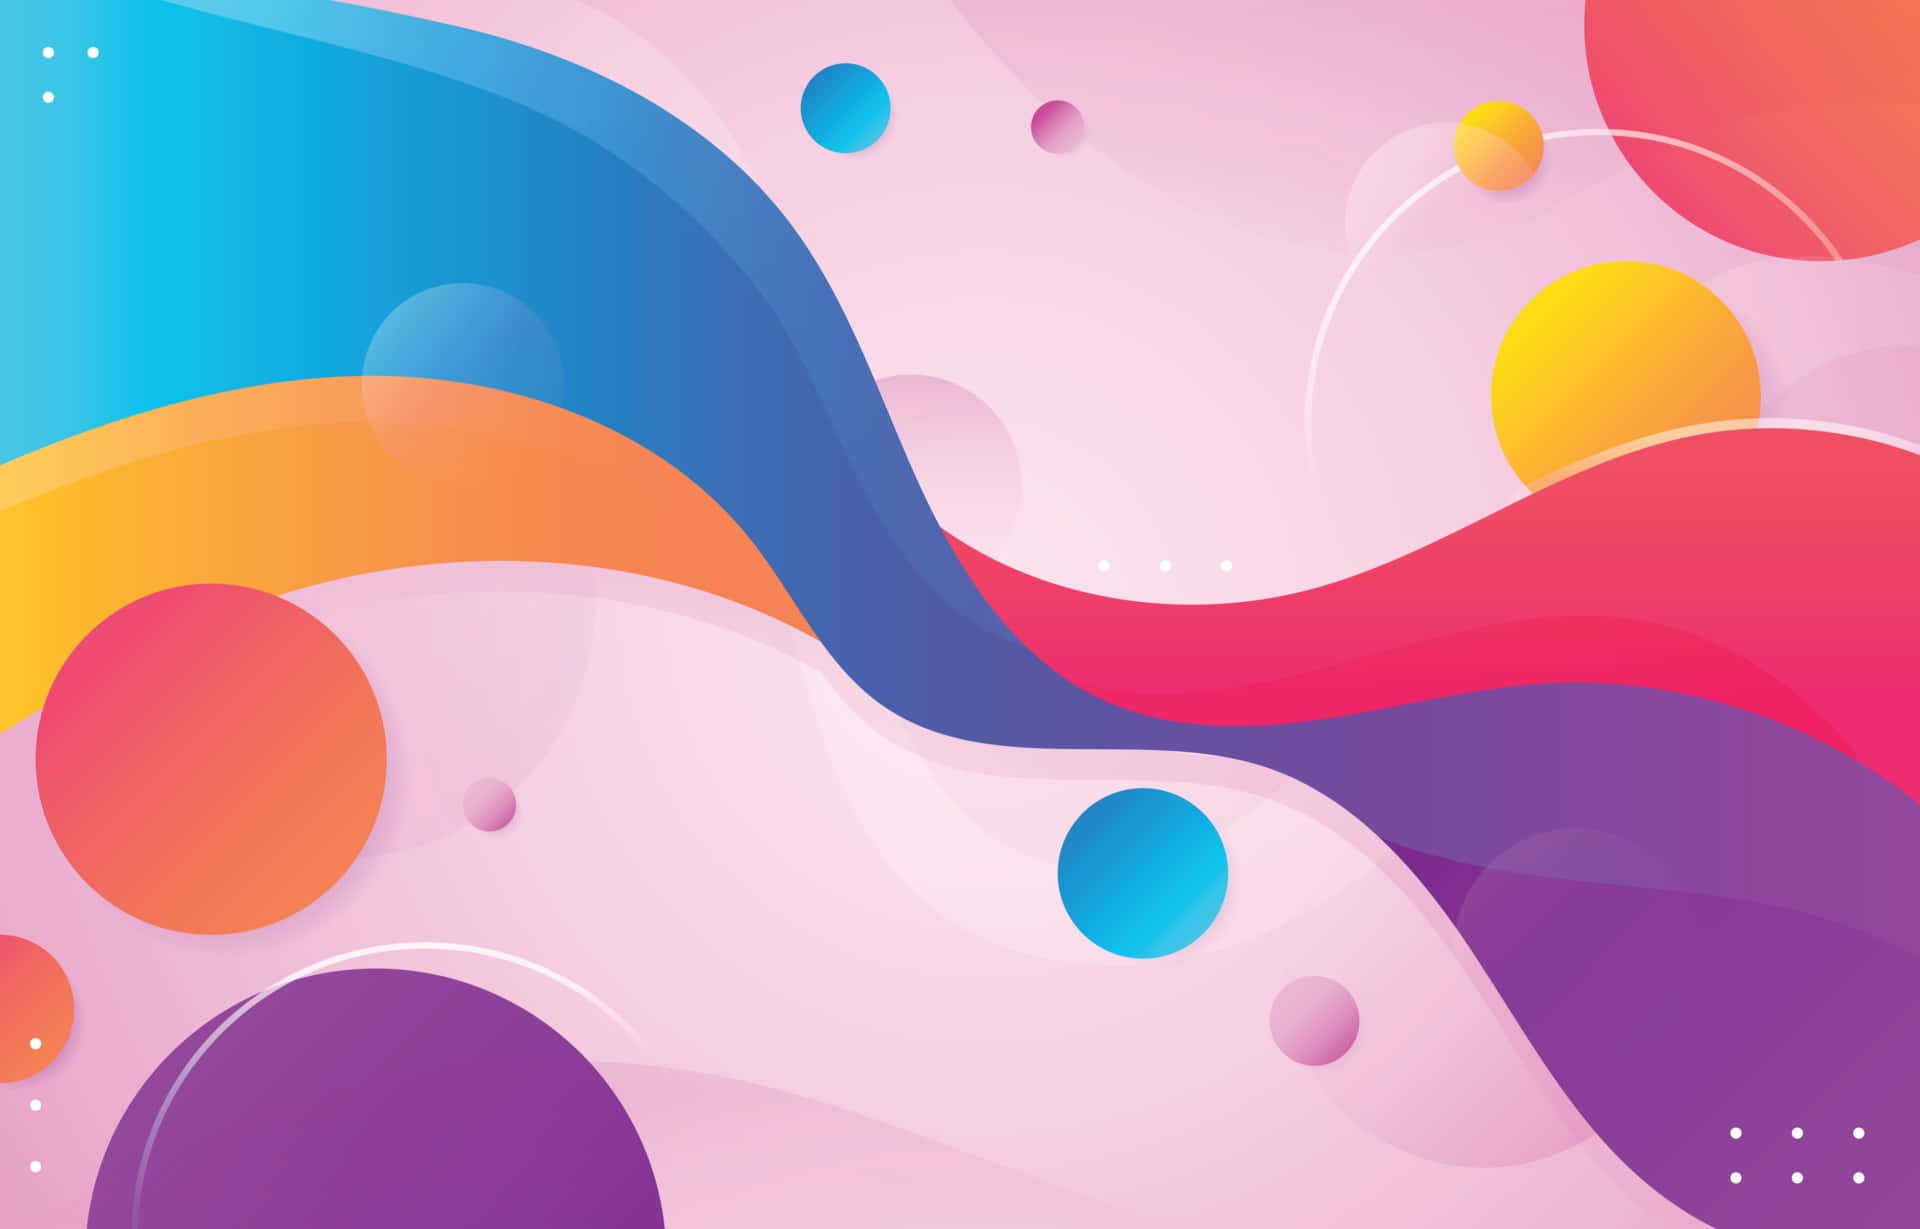 Abstract Colorful Background With Circles And Bubbles